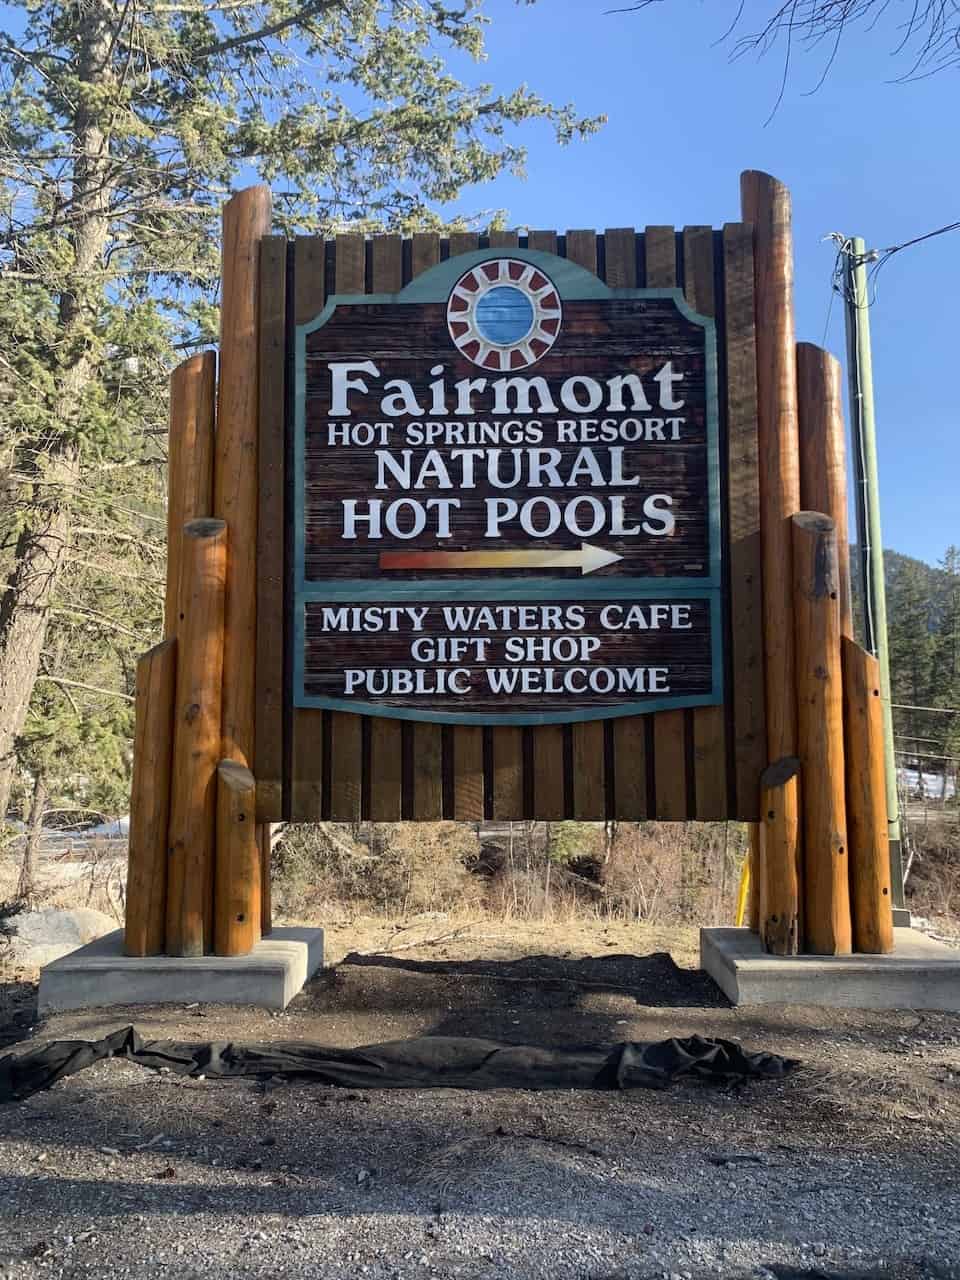 Fairmont Hot Springs Entrance Sign - The entrance sign at Fairmont Hot Springs informs visitors that they are in the correct location to enjoy the natural hot pools in Fairmont Hot Springs, British Columbia.